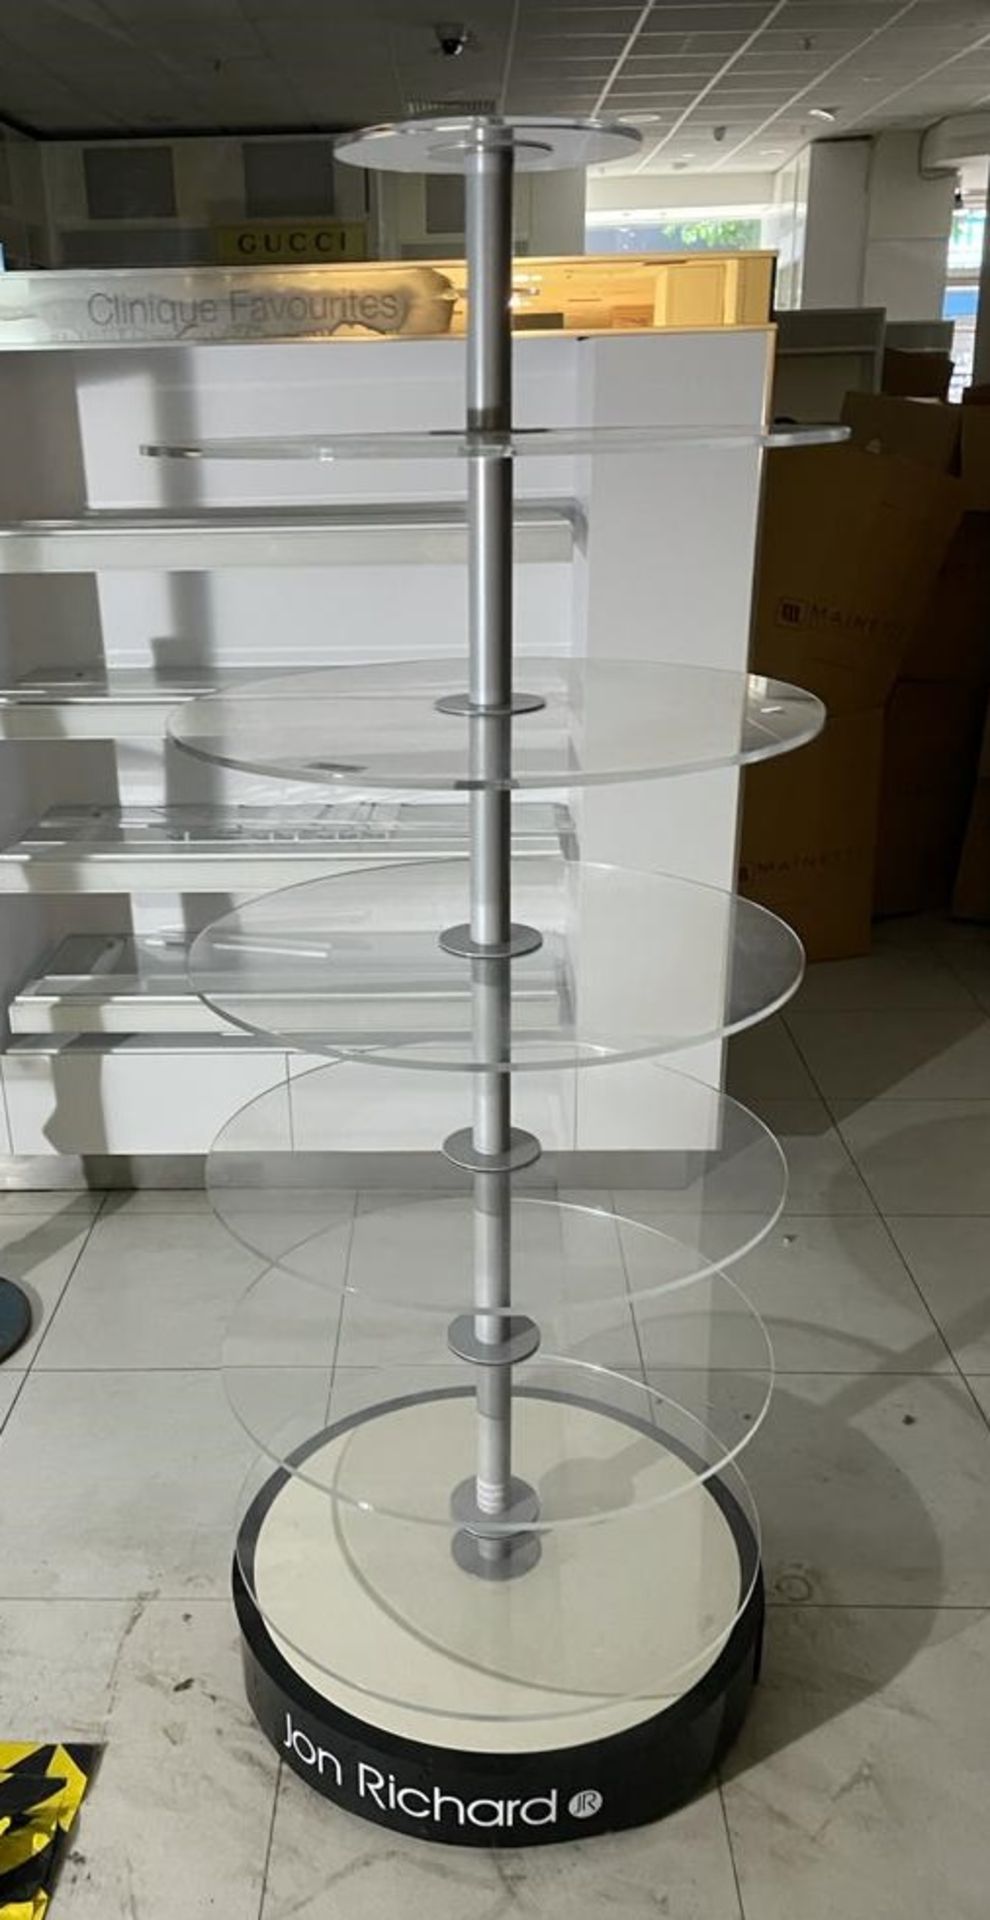 1 x Jon Richard Carousel Display Stand With 6 Glass Shelves - Size H155 x W59 cms - CL670 - Ref: